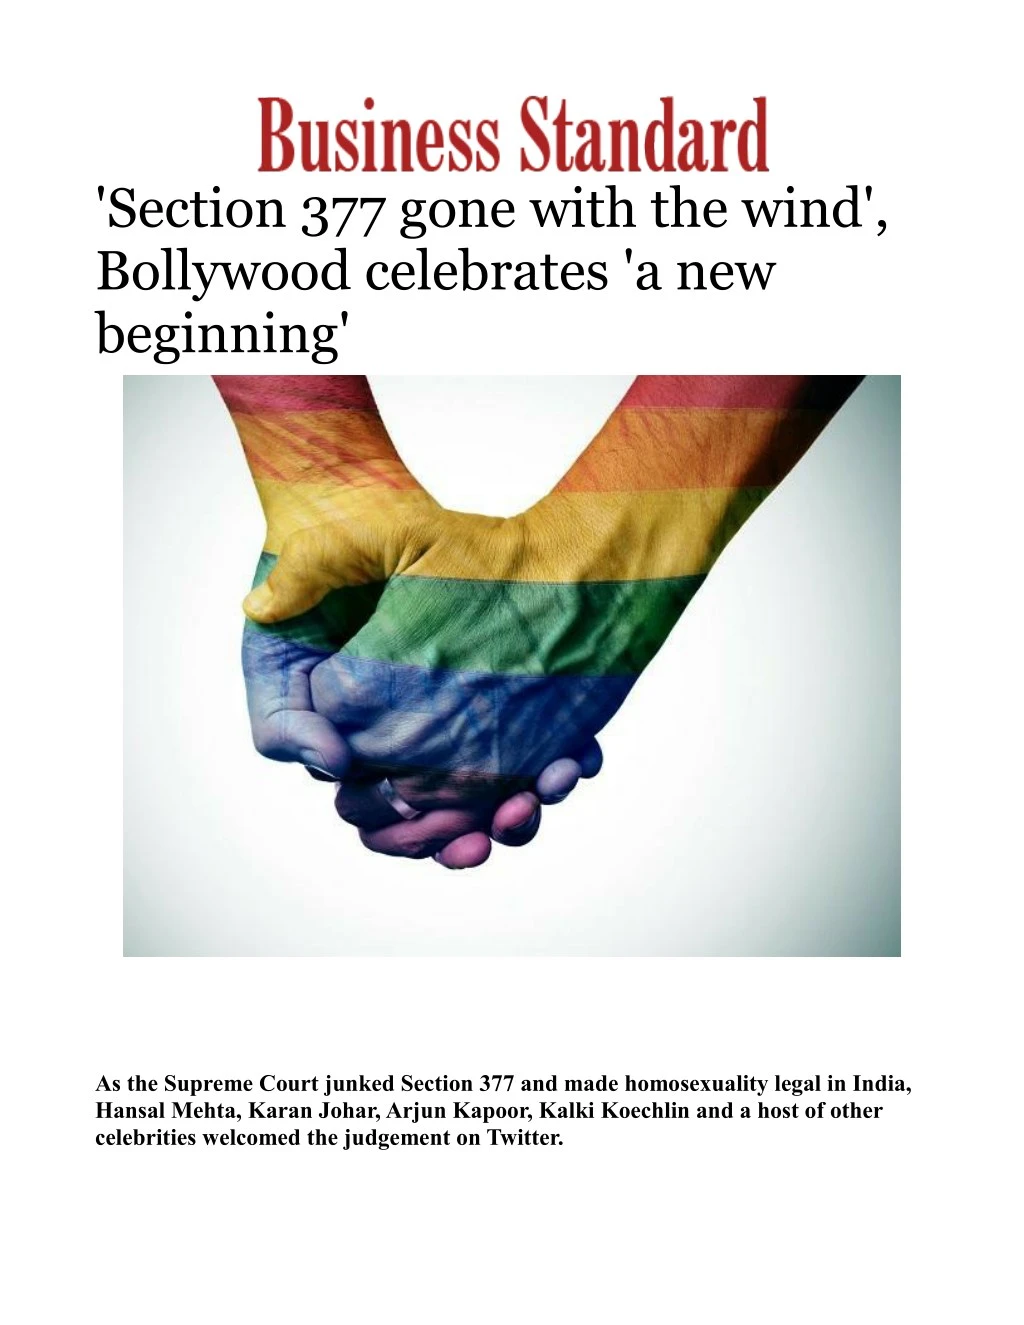 section 377 gone with the wind bollywood